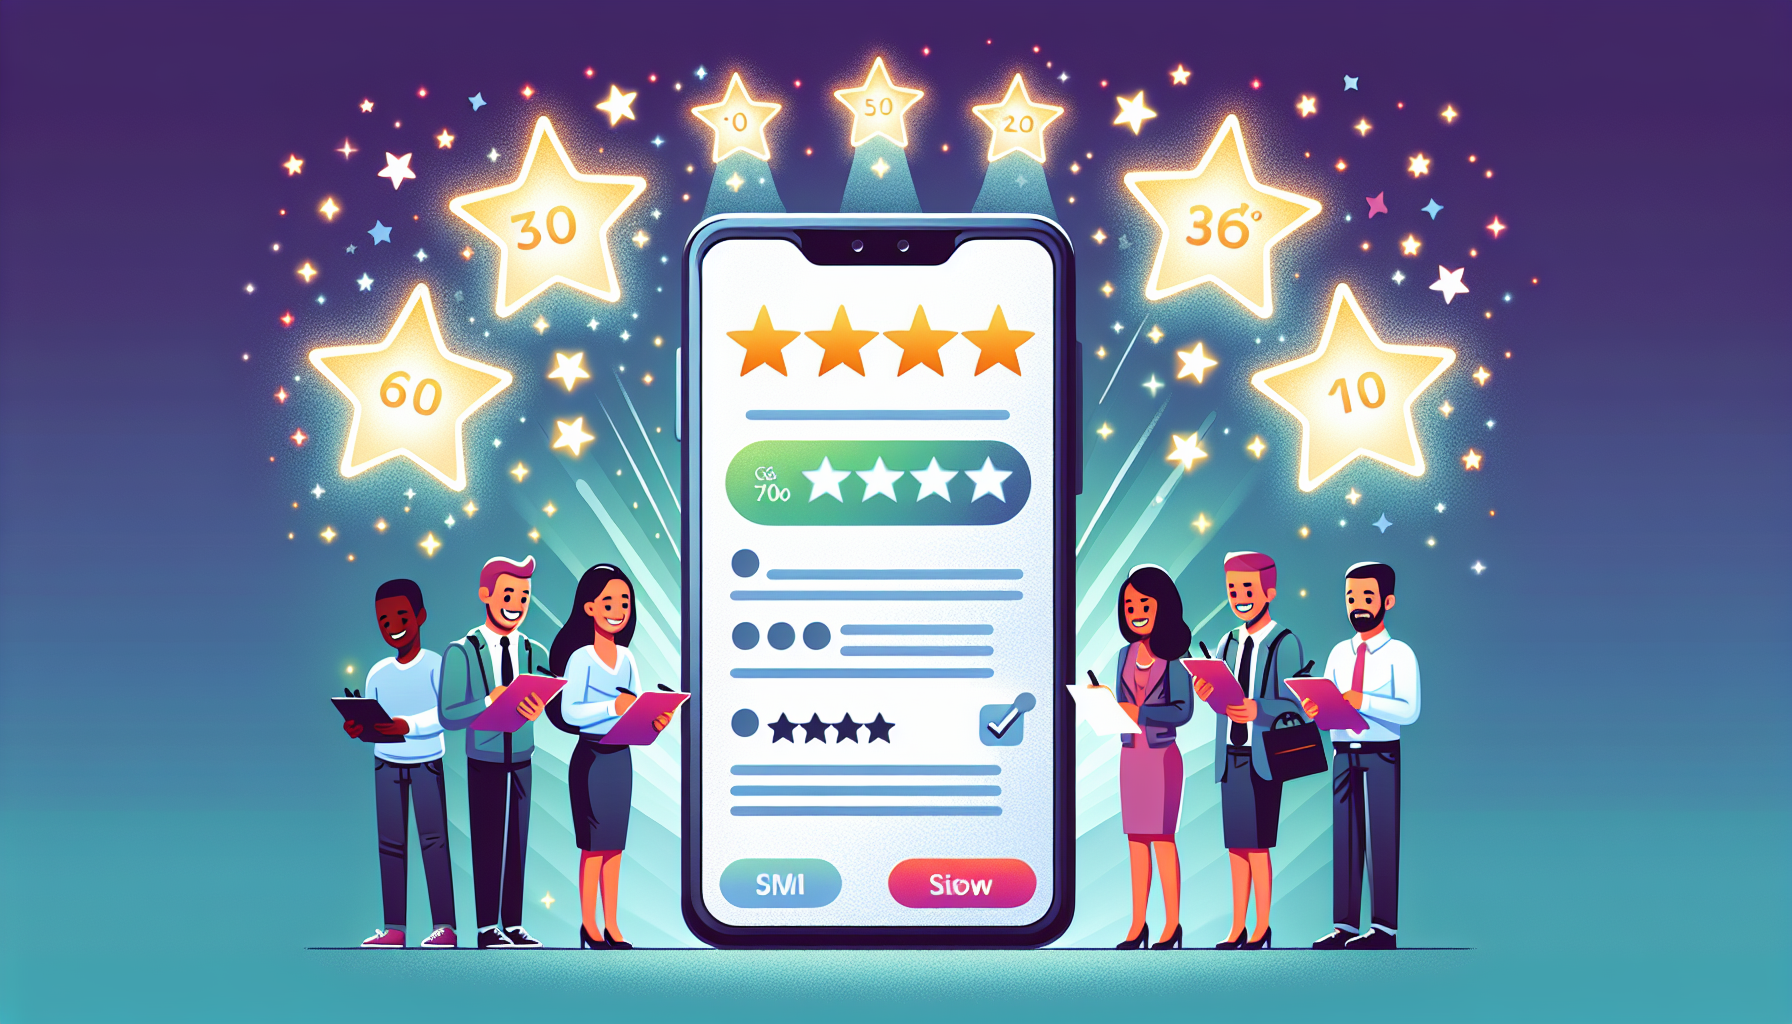 An illustration of a smartphone displaying a colorful SMS review and feedback template, surrounded by small, happy cartoon business owners taking notes, on a background of glowing 5-star ratings.